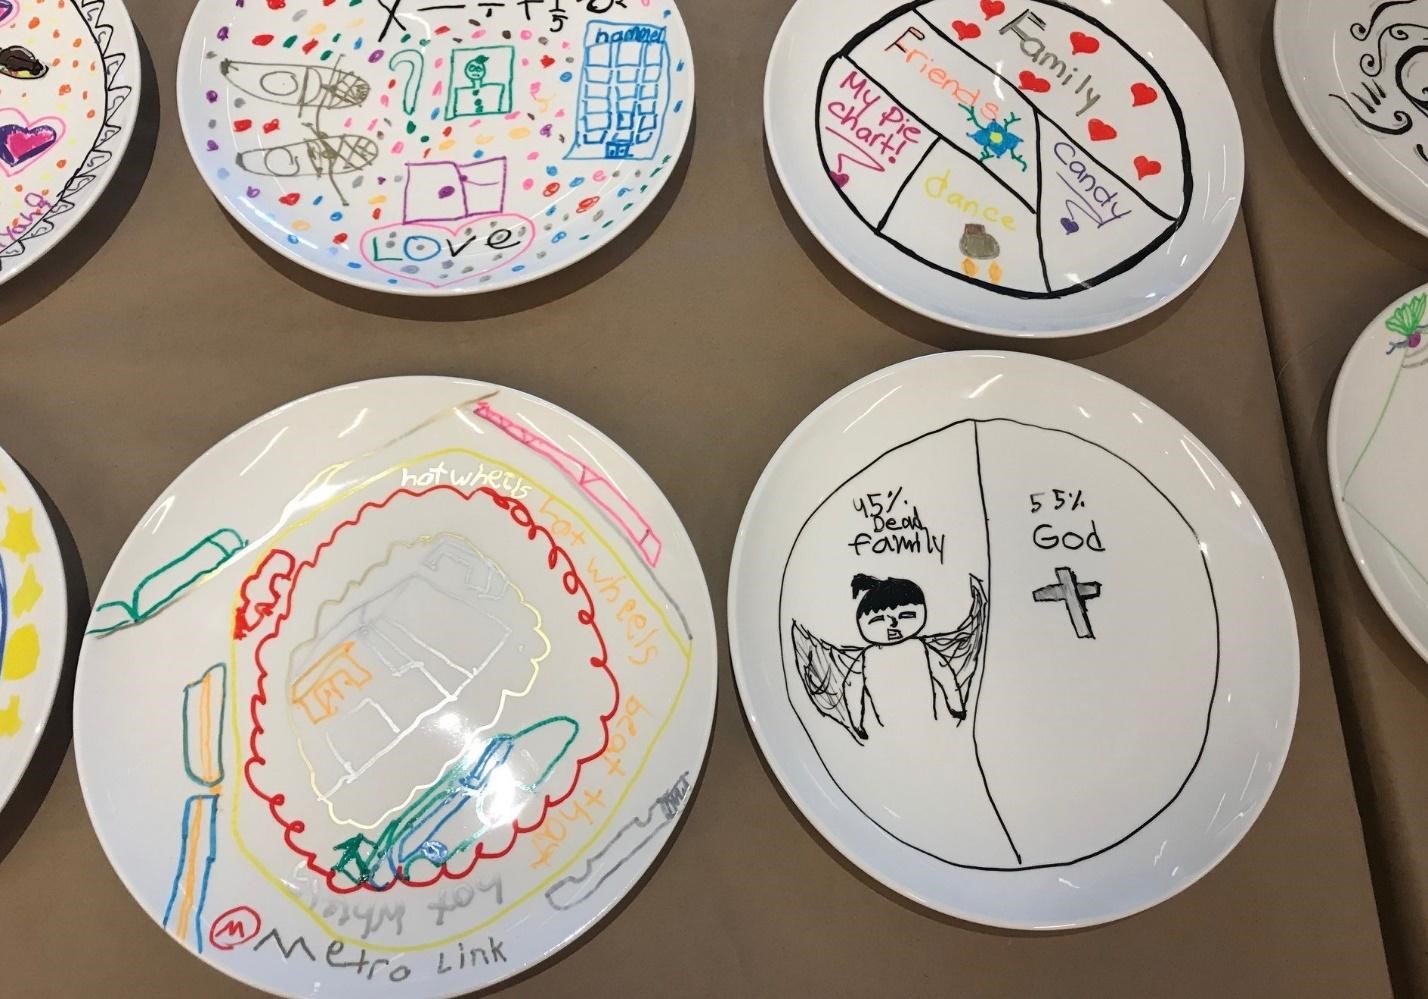 Among more colorful, elaborately designed plates, the grieving student's is shown: a simple black pie chart that says "45% dead family" and "55% God," with illustrations of an angel and a crucifix.